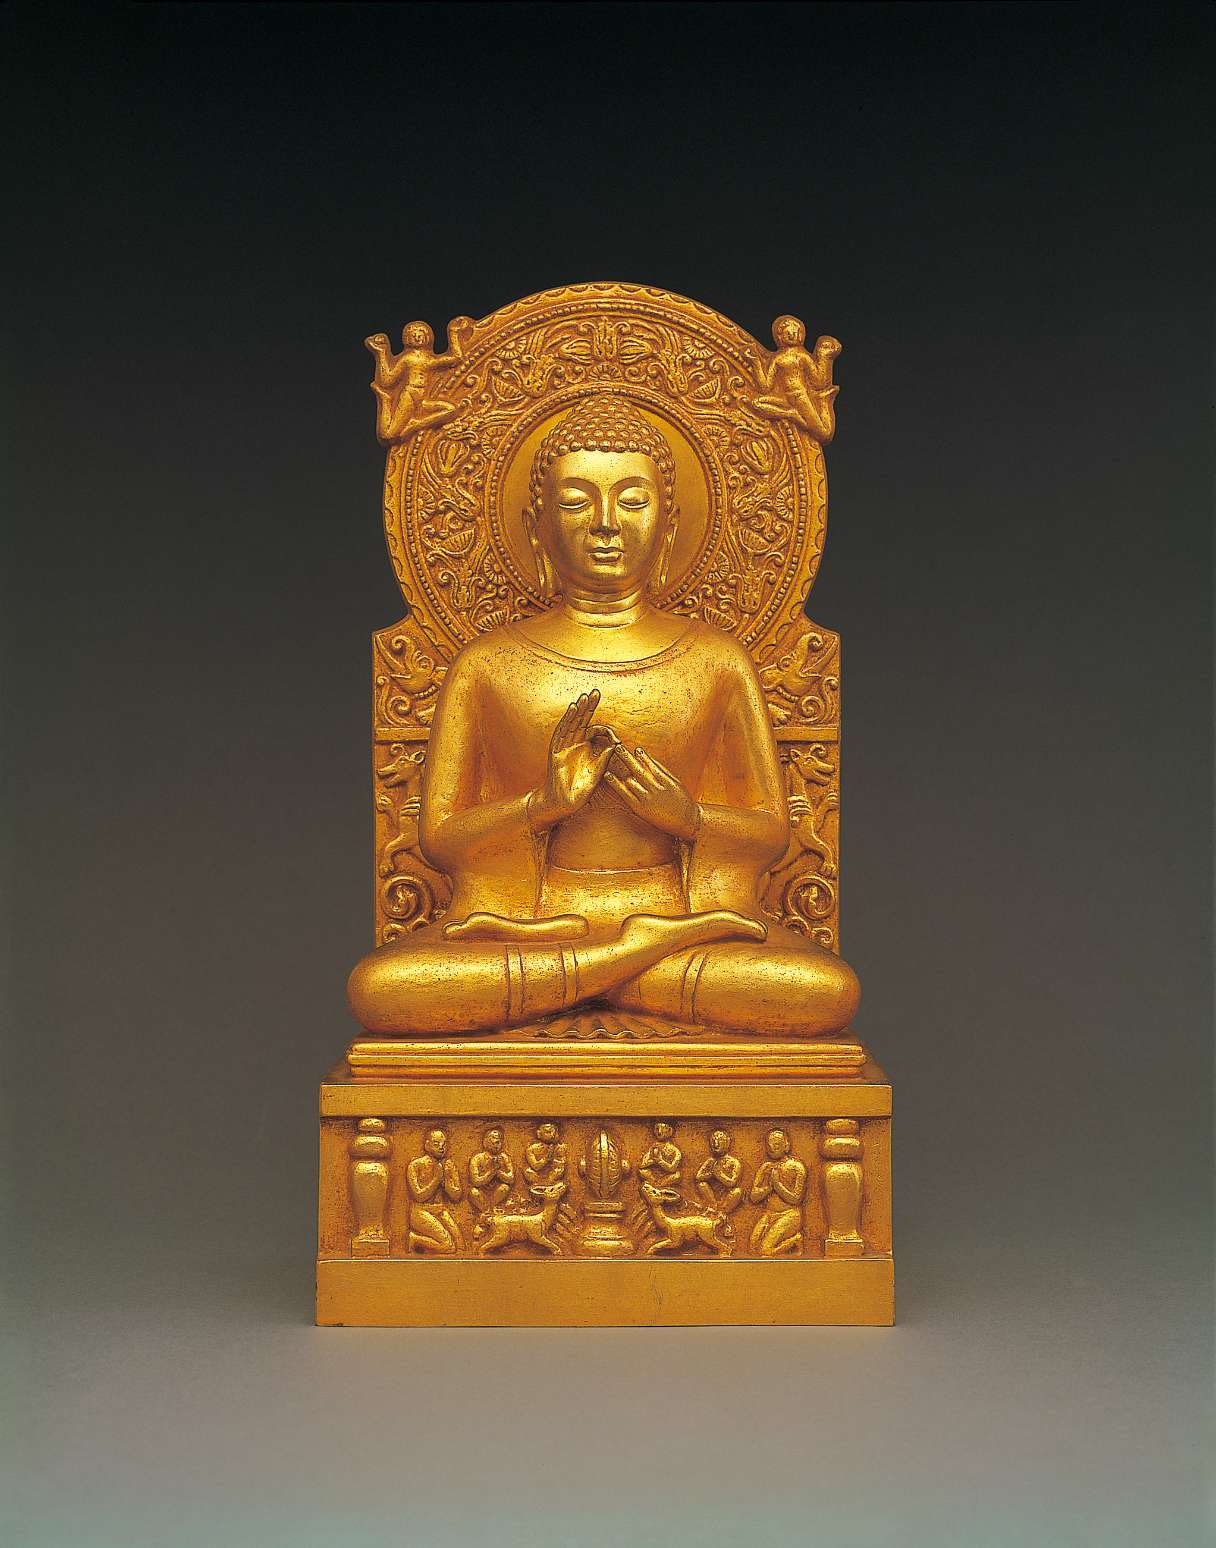 A golden hued statue of Buddha sitting cross-legged, his hands in teaching gesture, atop a throne decorated with images of disciples, deer, and a wheel, backed by an ornately decorated nimbus.